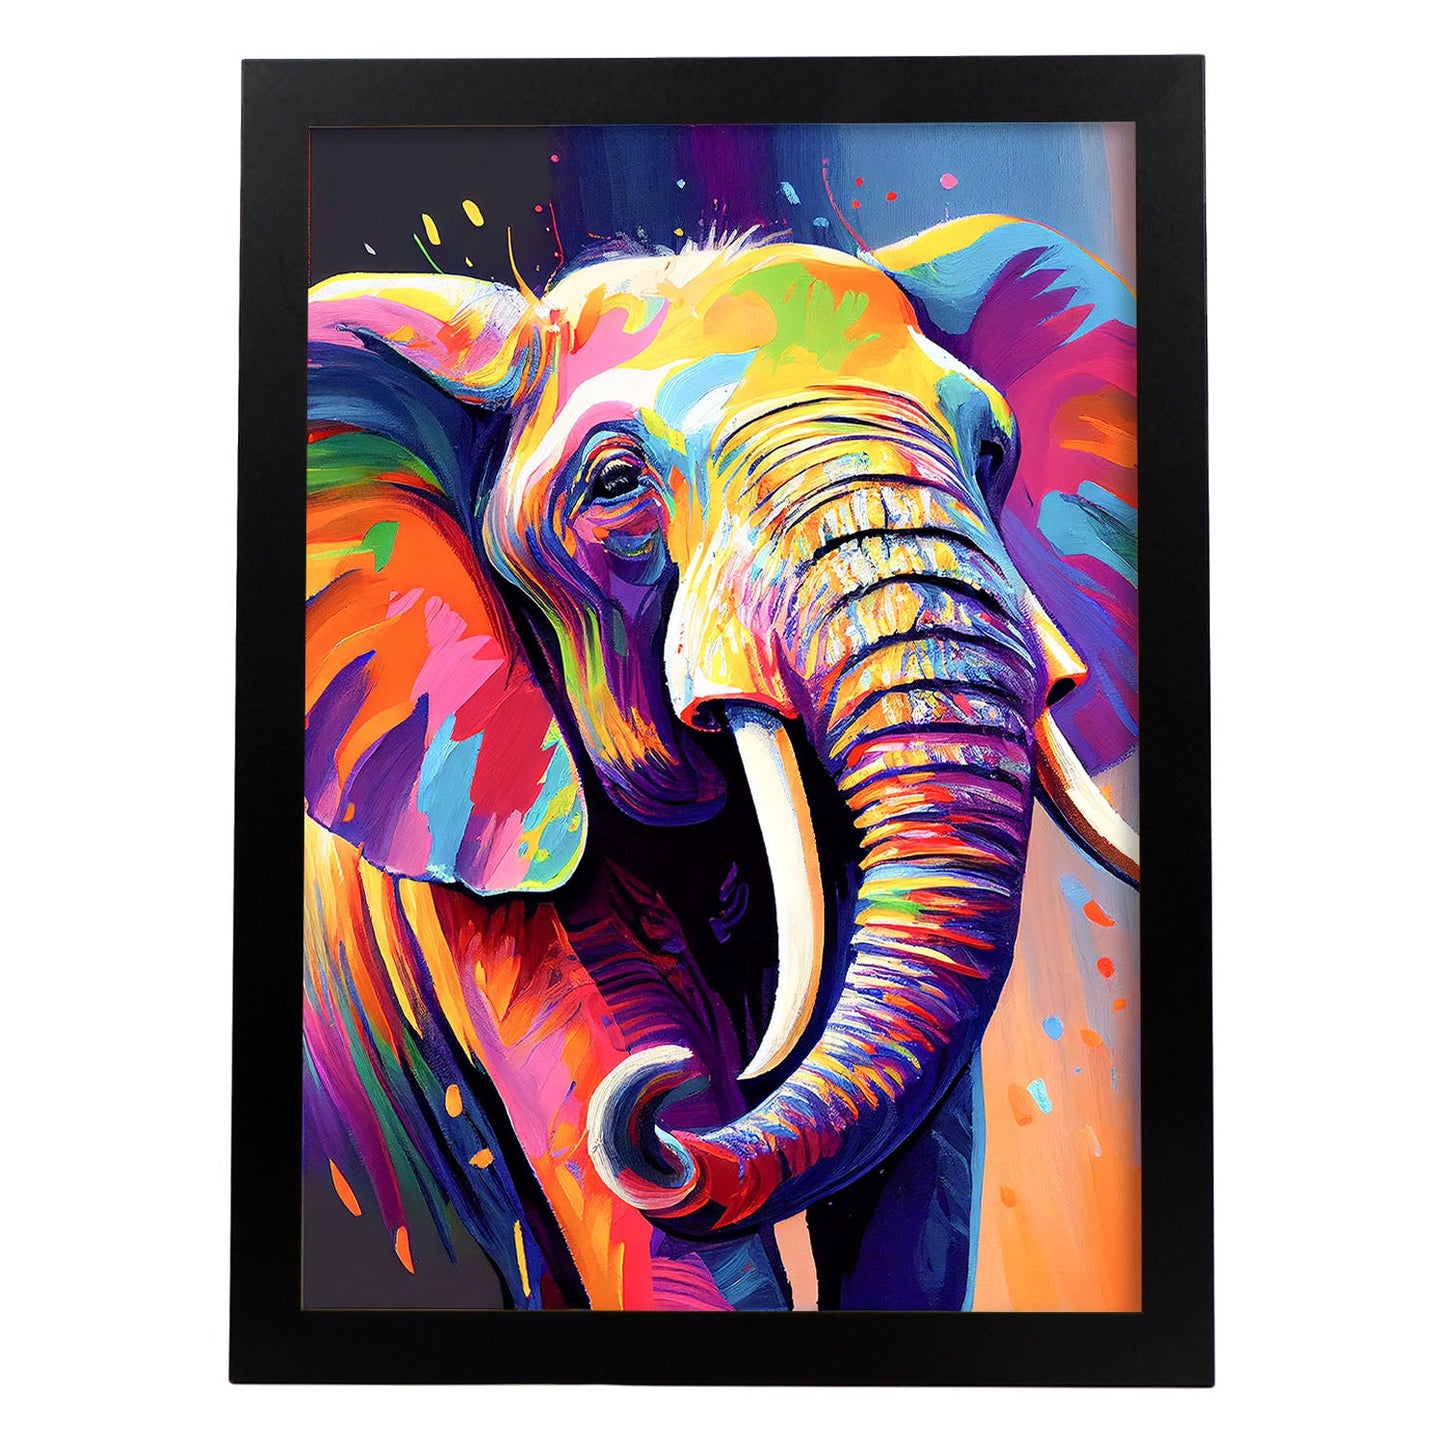 Nacnic Abstract smiling Elephant in Lisa Fran Style_1. Aesthetic Wall Art Prints for Bedroom or Living Room Design.